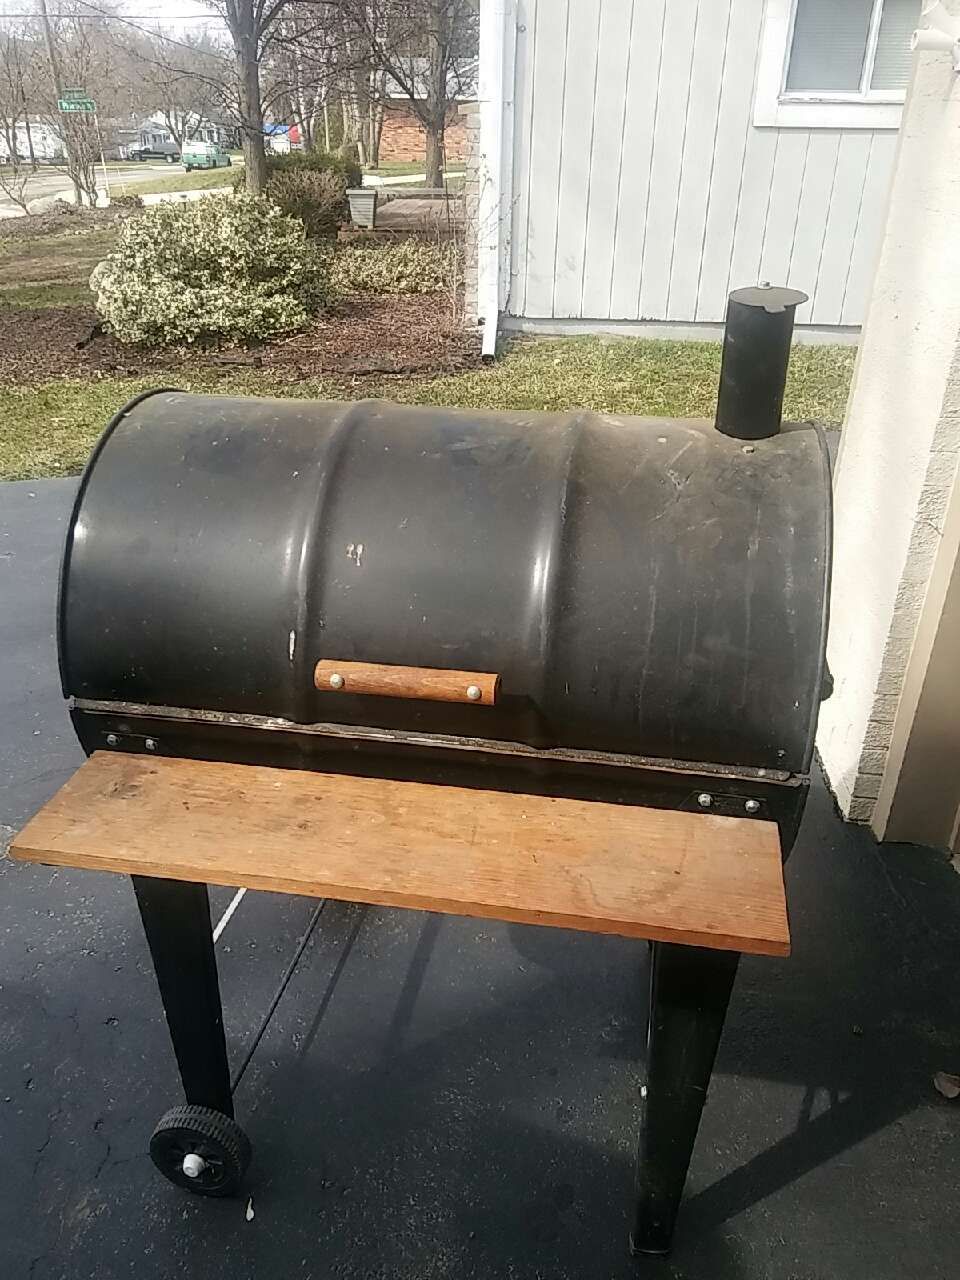 BBQ Grill charcoal used once for party $75